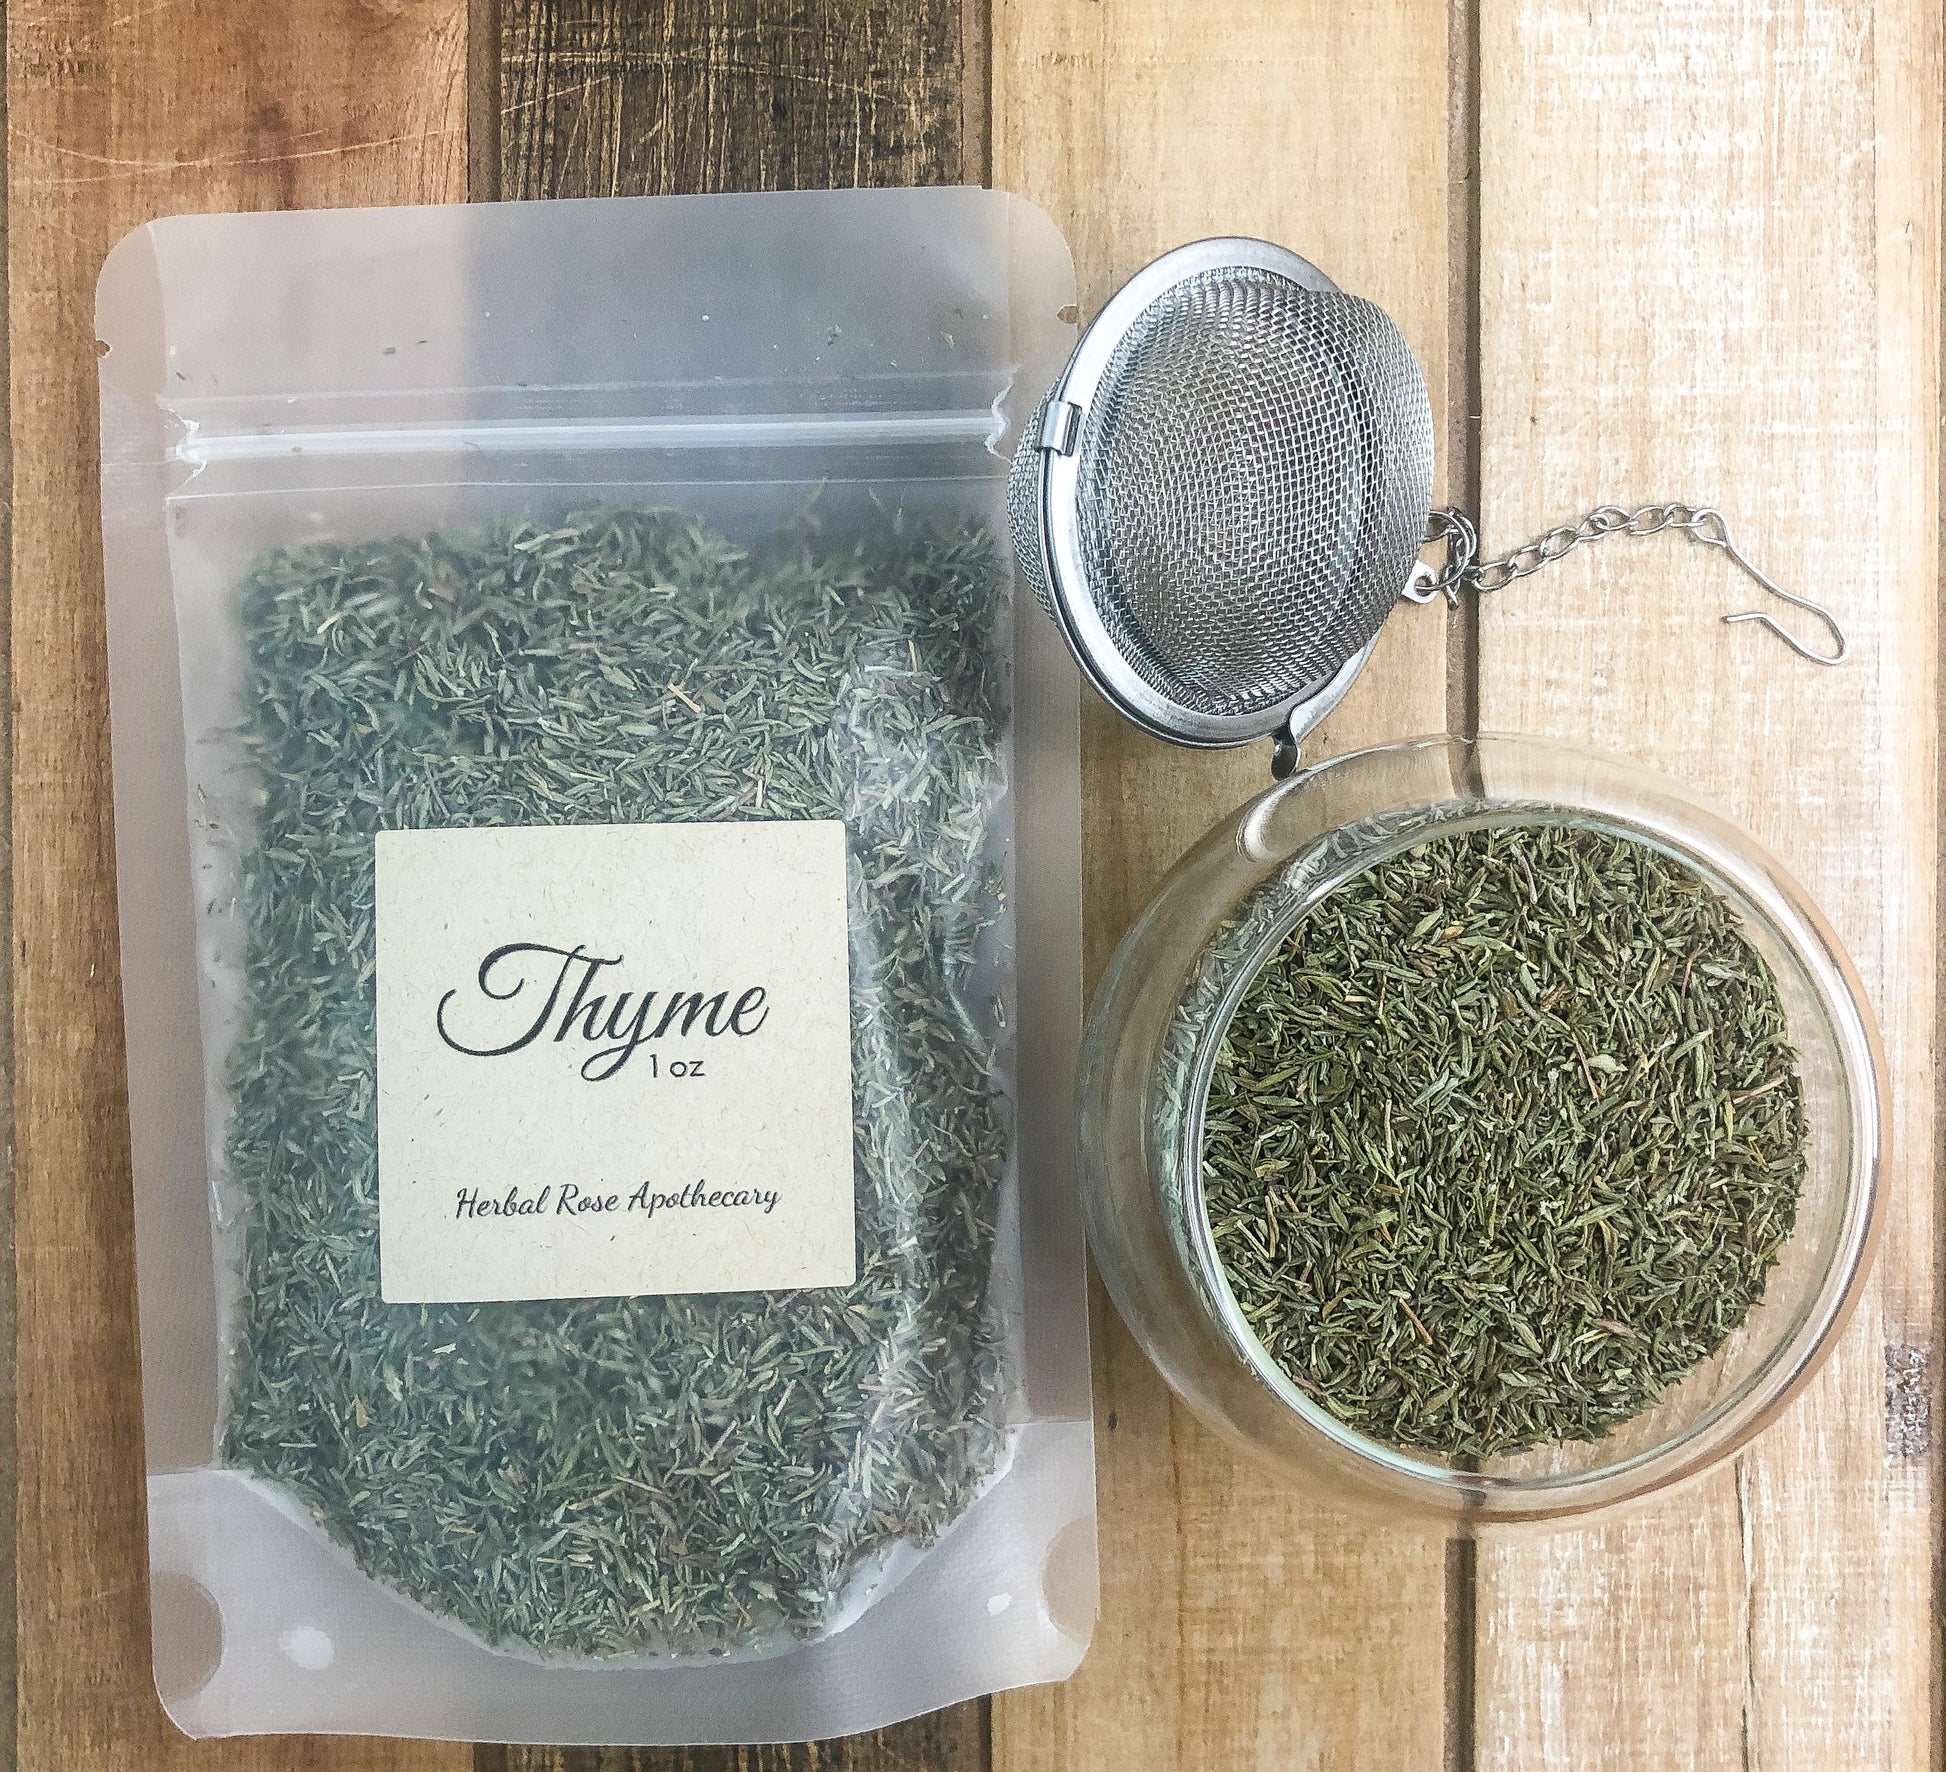 dried thyme in clear 1oz bag next to a mesh tea infuser and clear glass cup of dried thyme on a wooden table as background